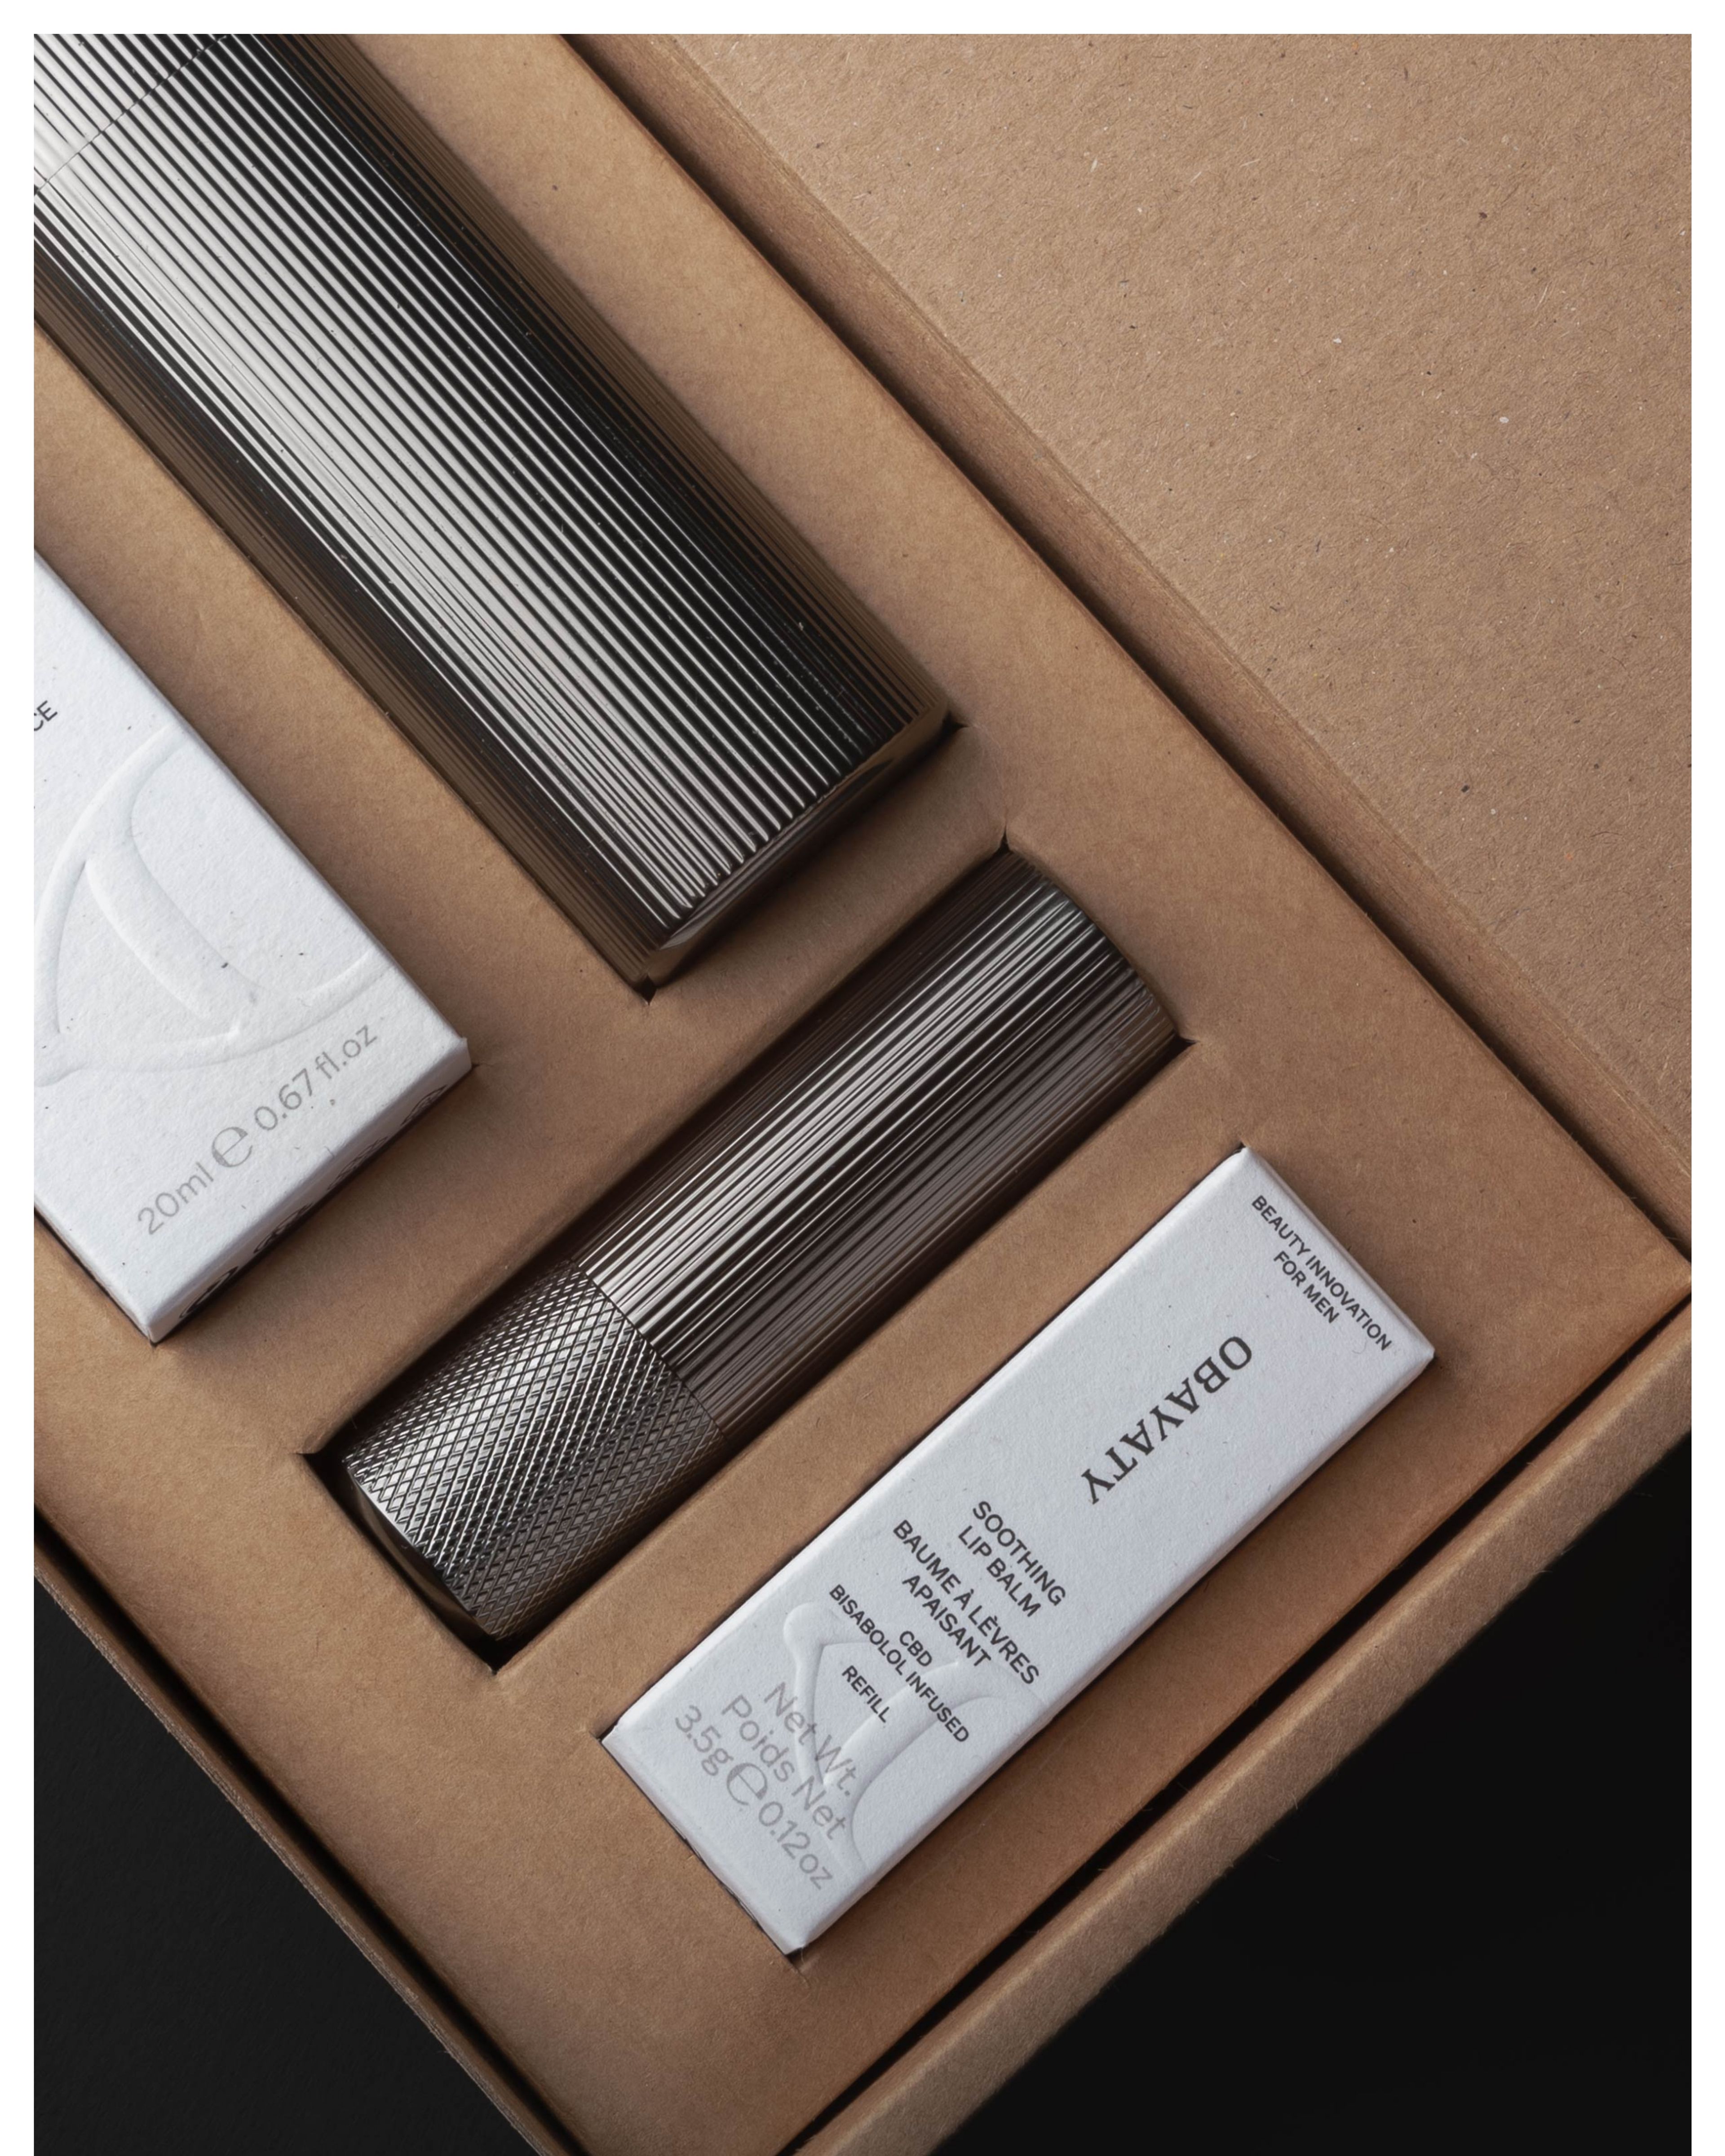 A kit containing a mens moisturizer and lip balm. Laying in a cardboard box.